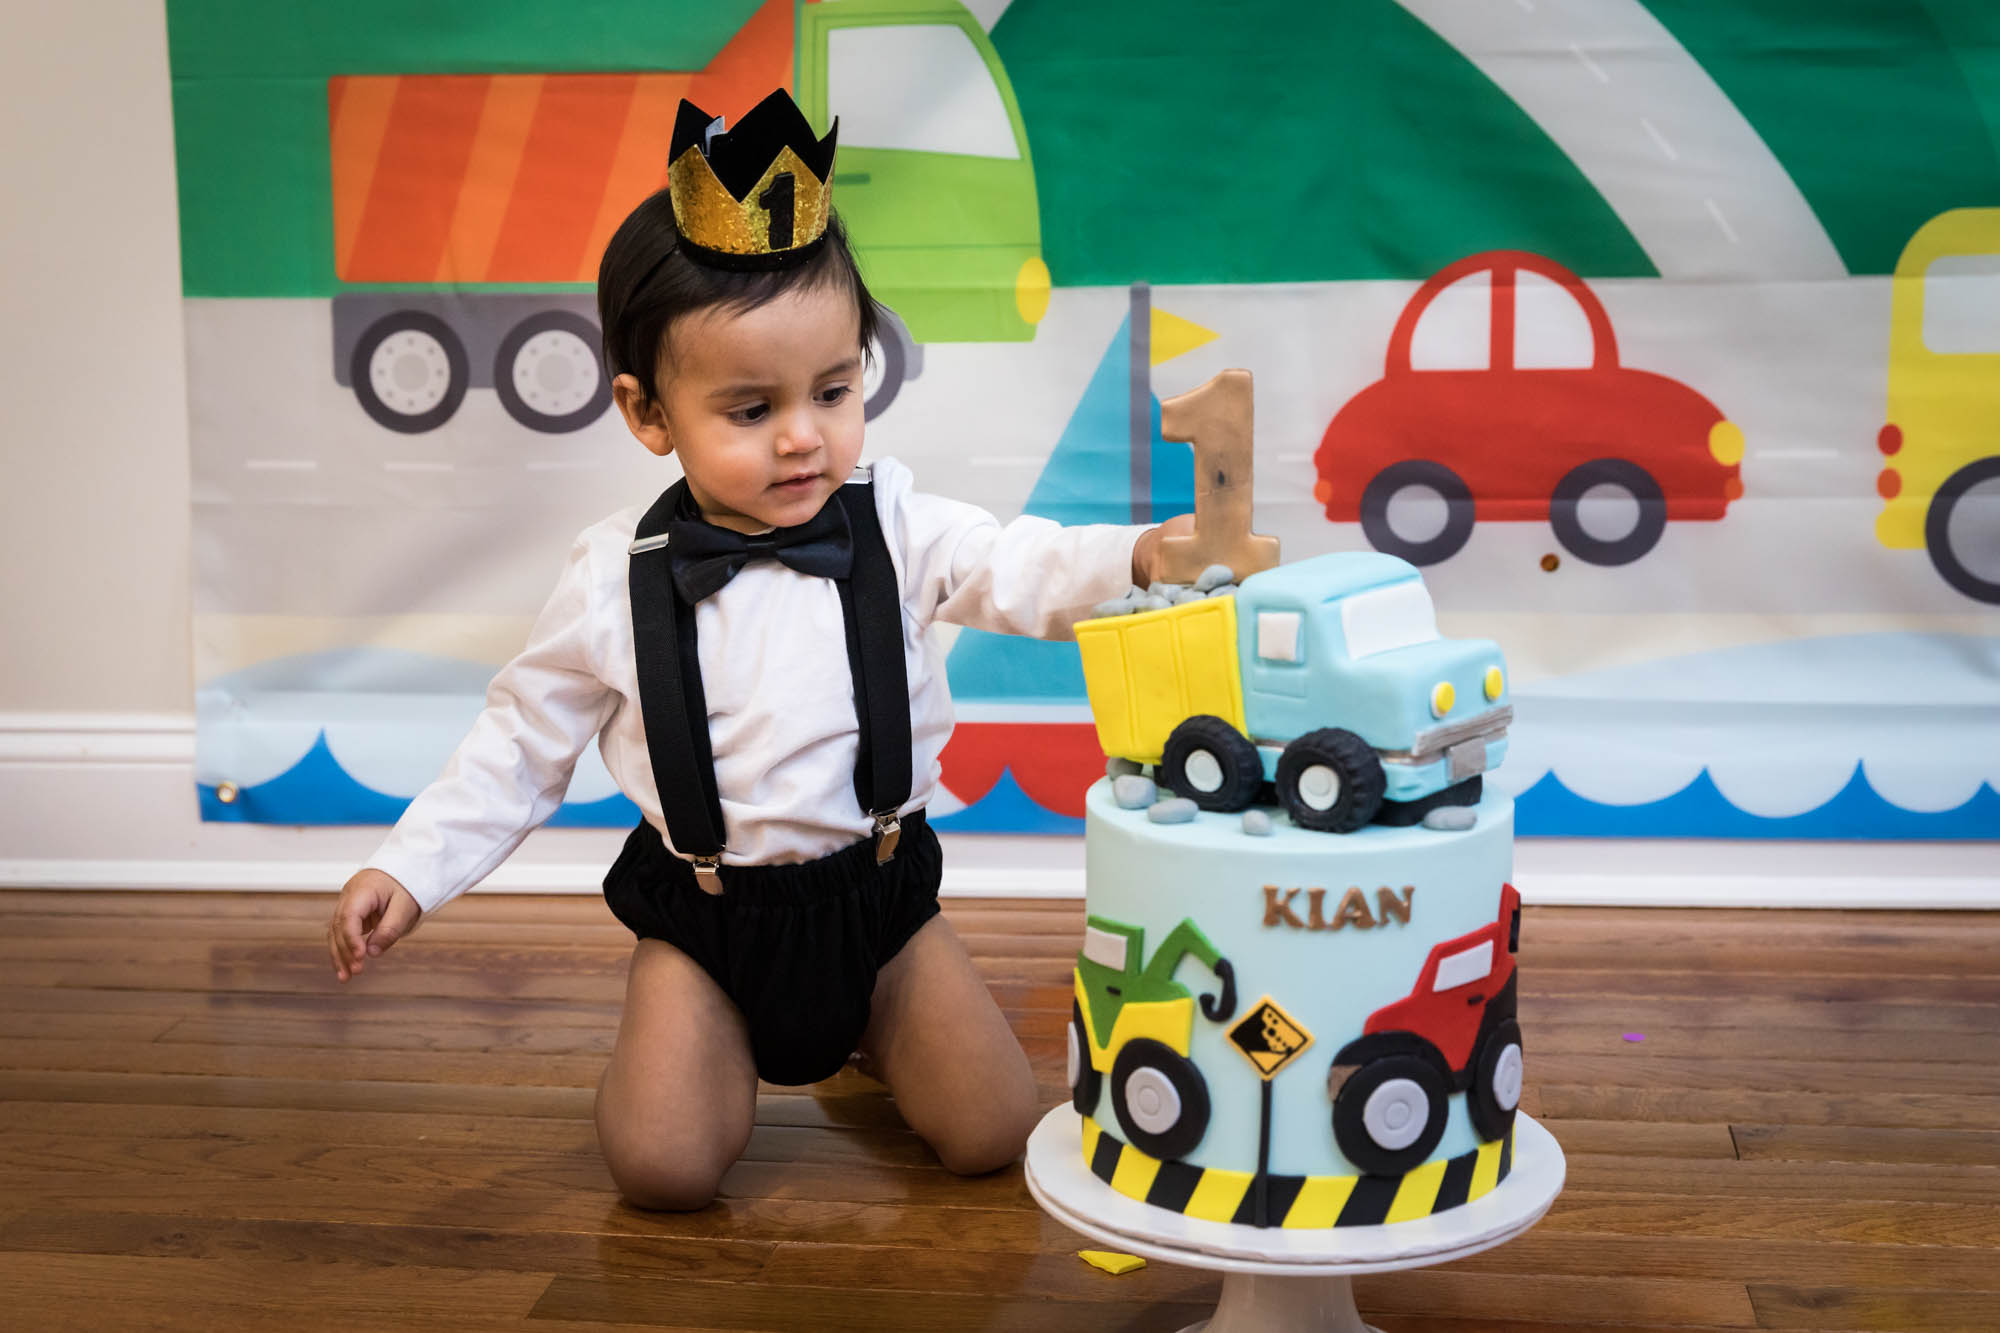 Little boy sitting on wooden floor touching truck-themed cake wearing gold crown and black bow tie for an article on cake smash tips